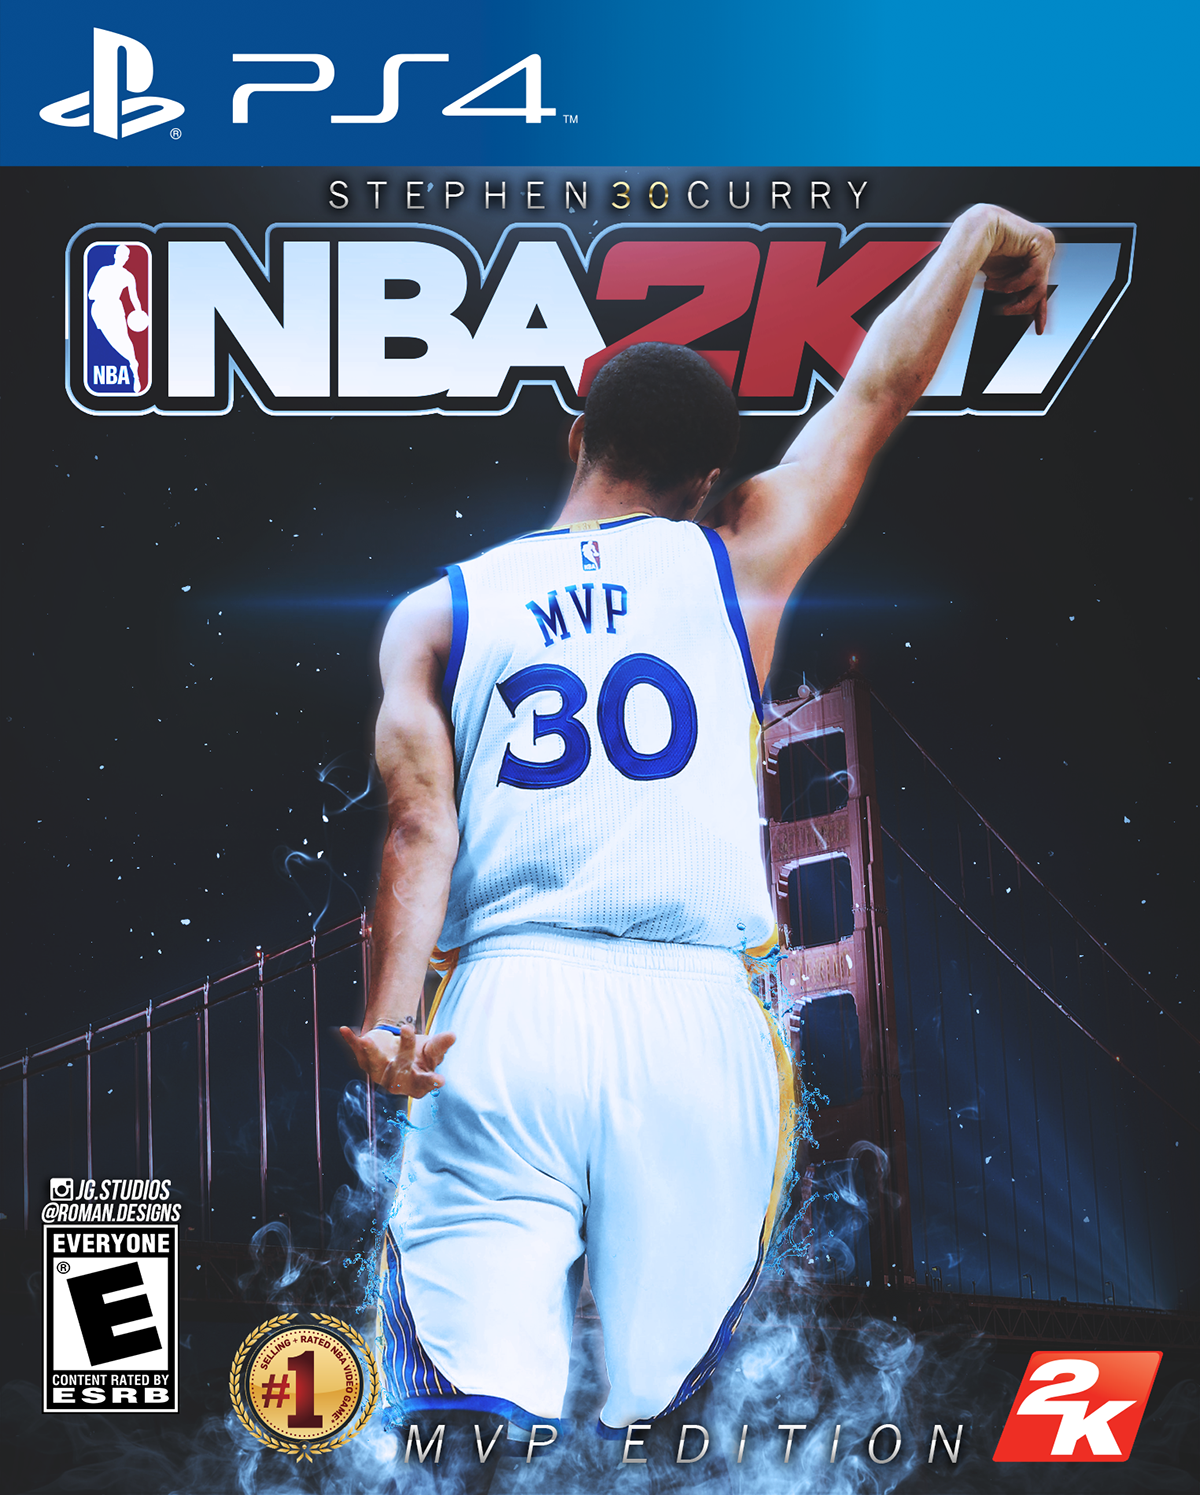 MVP Edition 2K17 Cover Featuring Stephen Curry on Behance